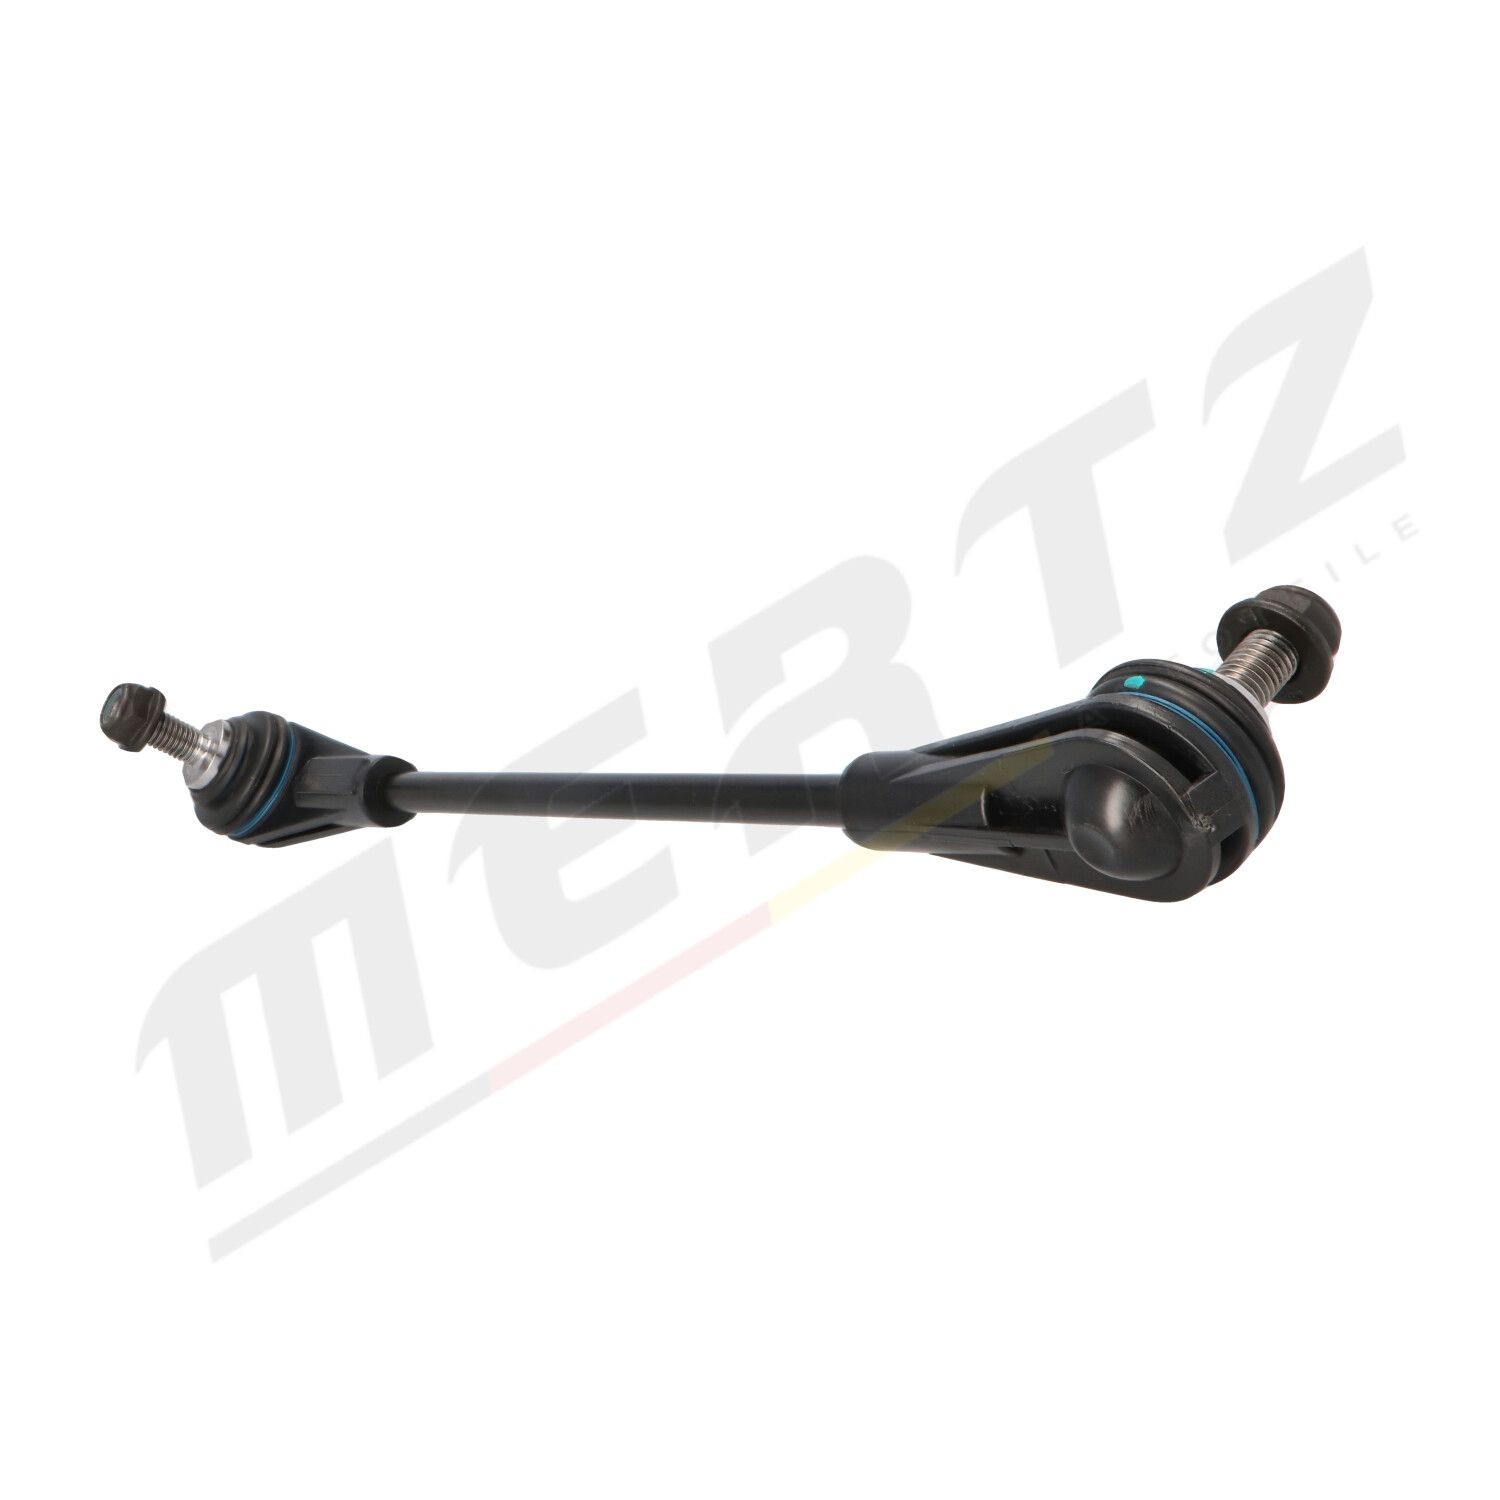 MS2121 Anti-roll bar links MERTZ M-S2121 review and test